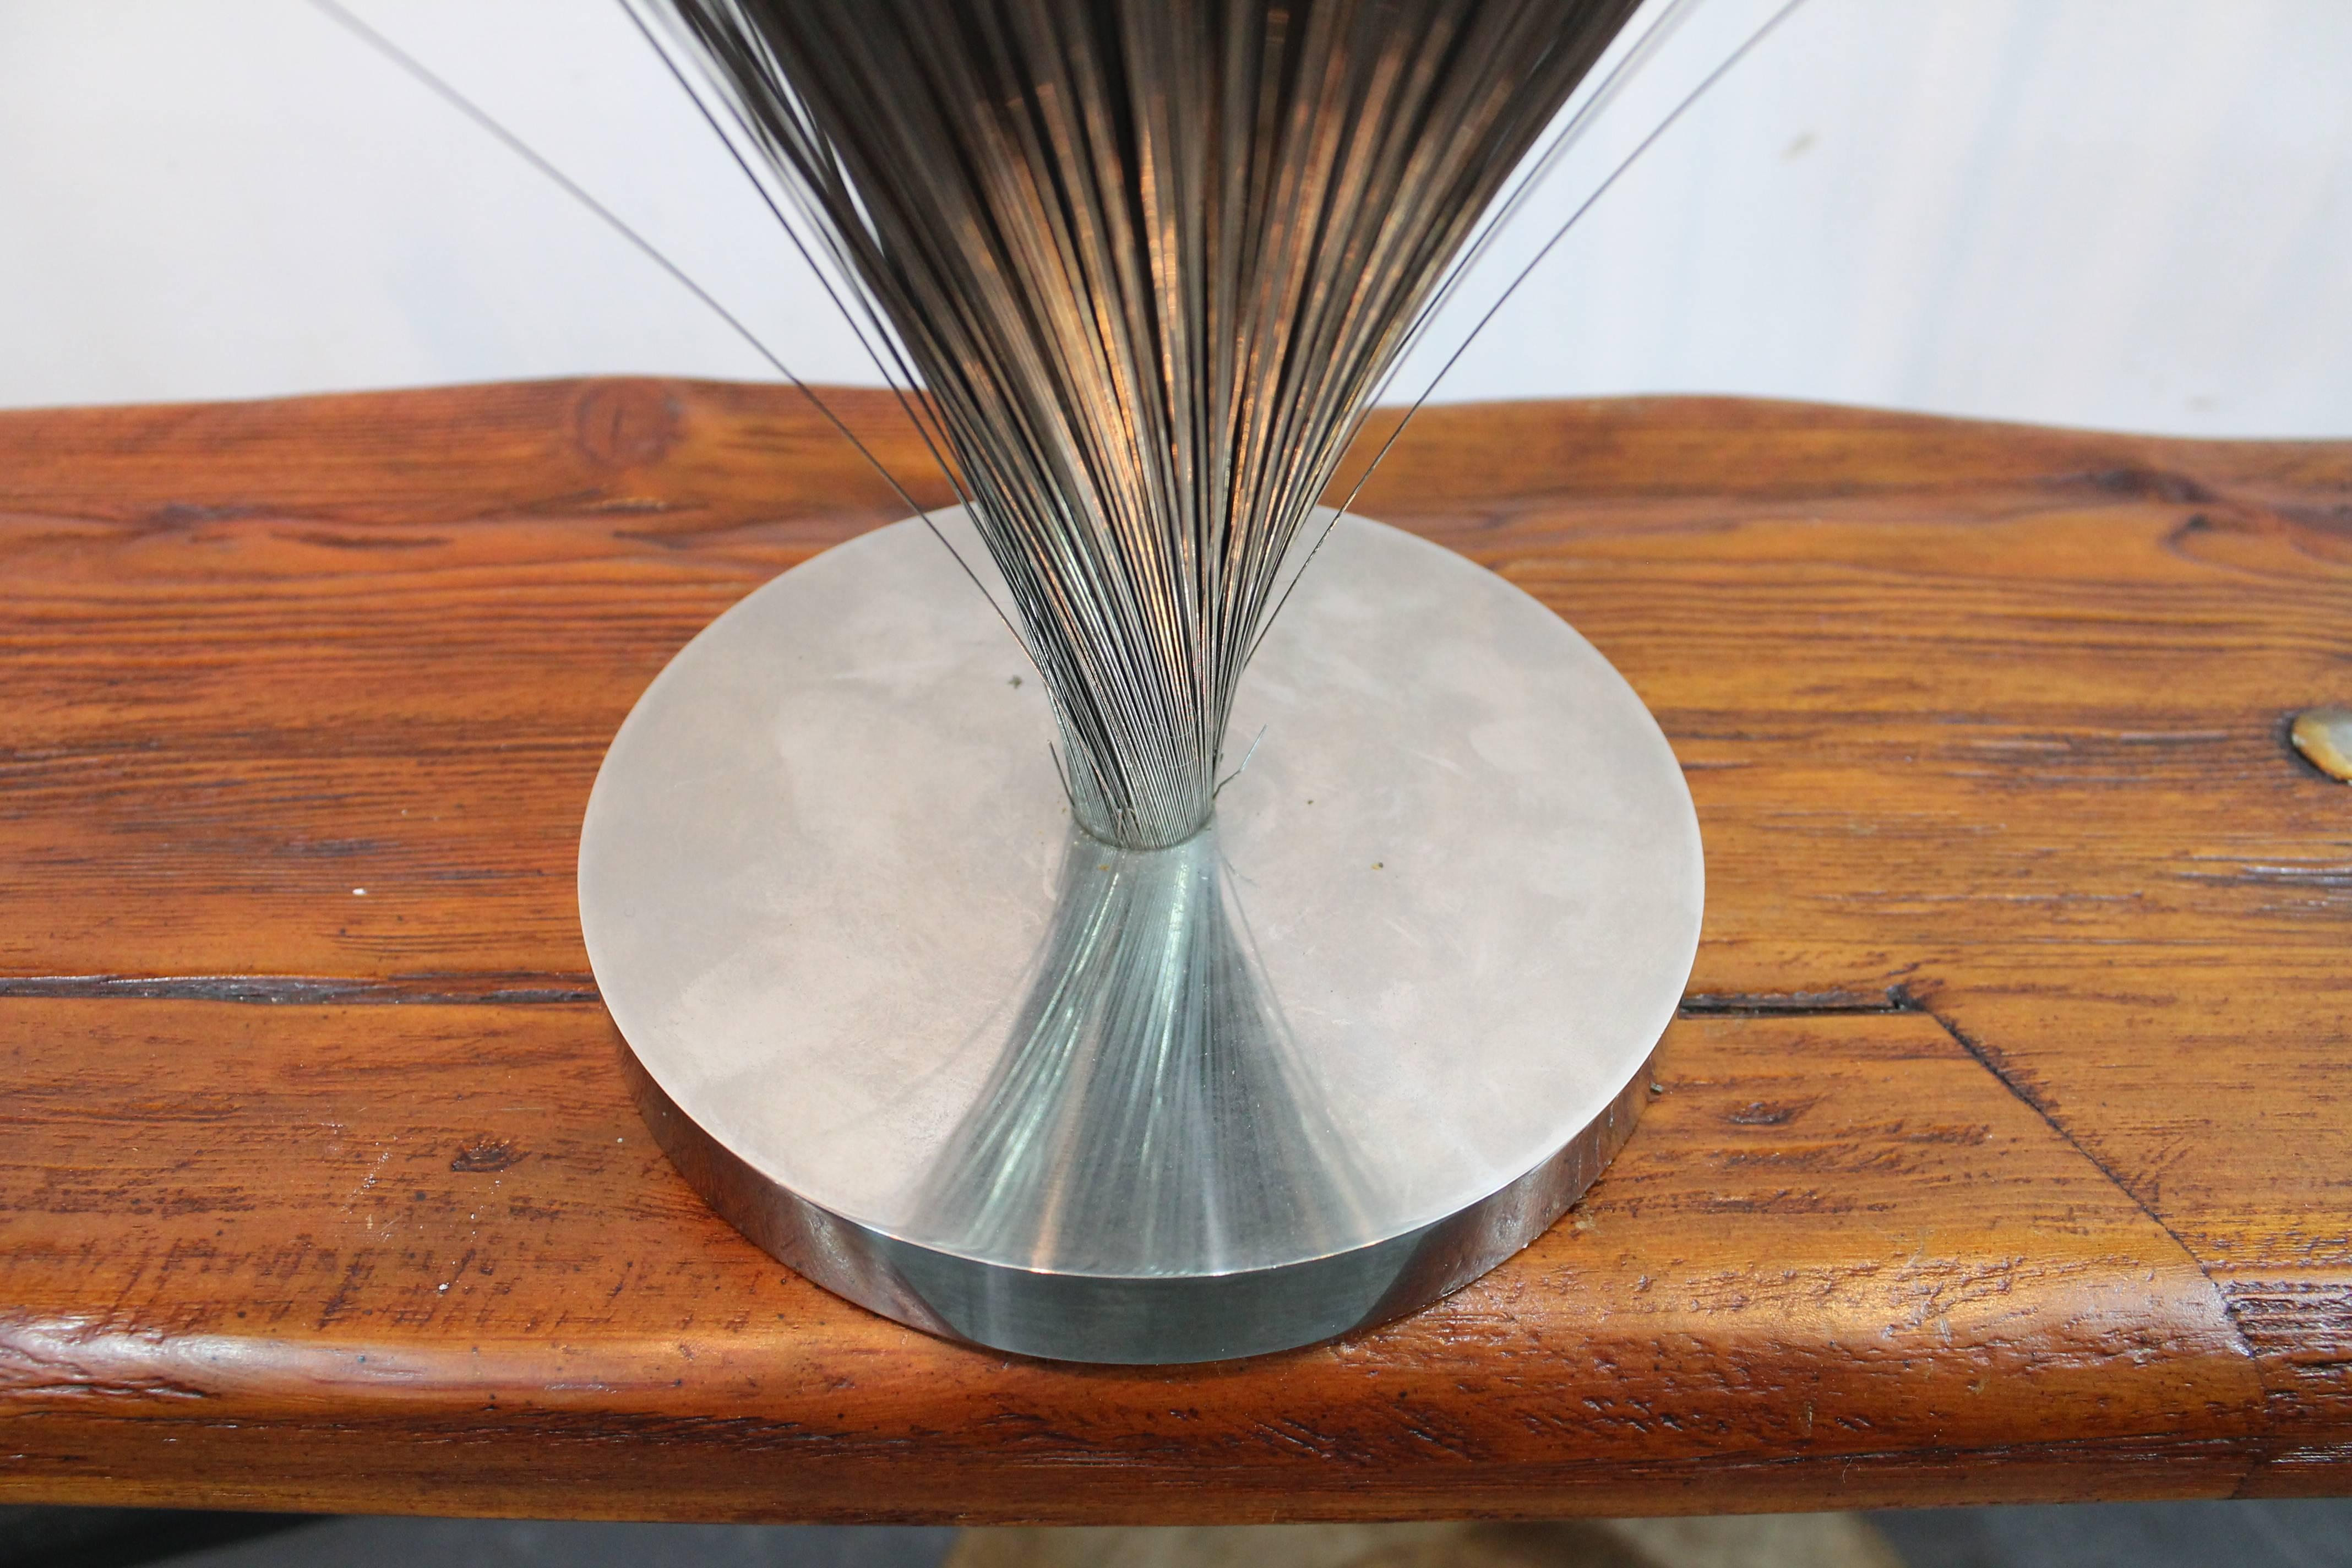 Wonderful iconic mid-20th century spray sculpture after Bertoia by Tom McAllister. Stamped on the bottom McAllister Tanzaz Ca and stamped on the side of the base TMW with a copyright mark.